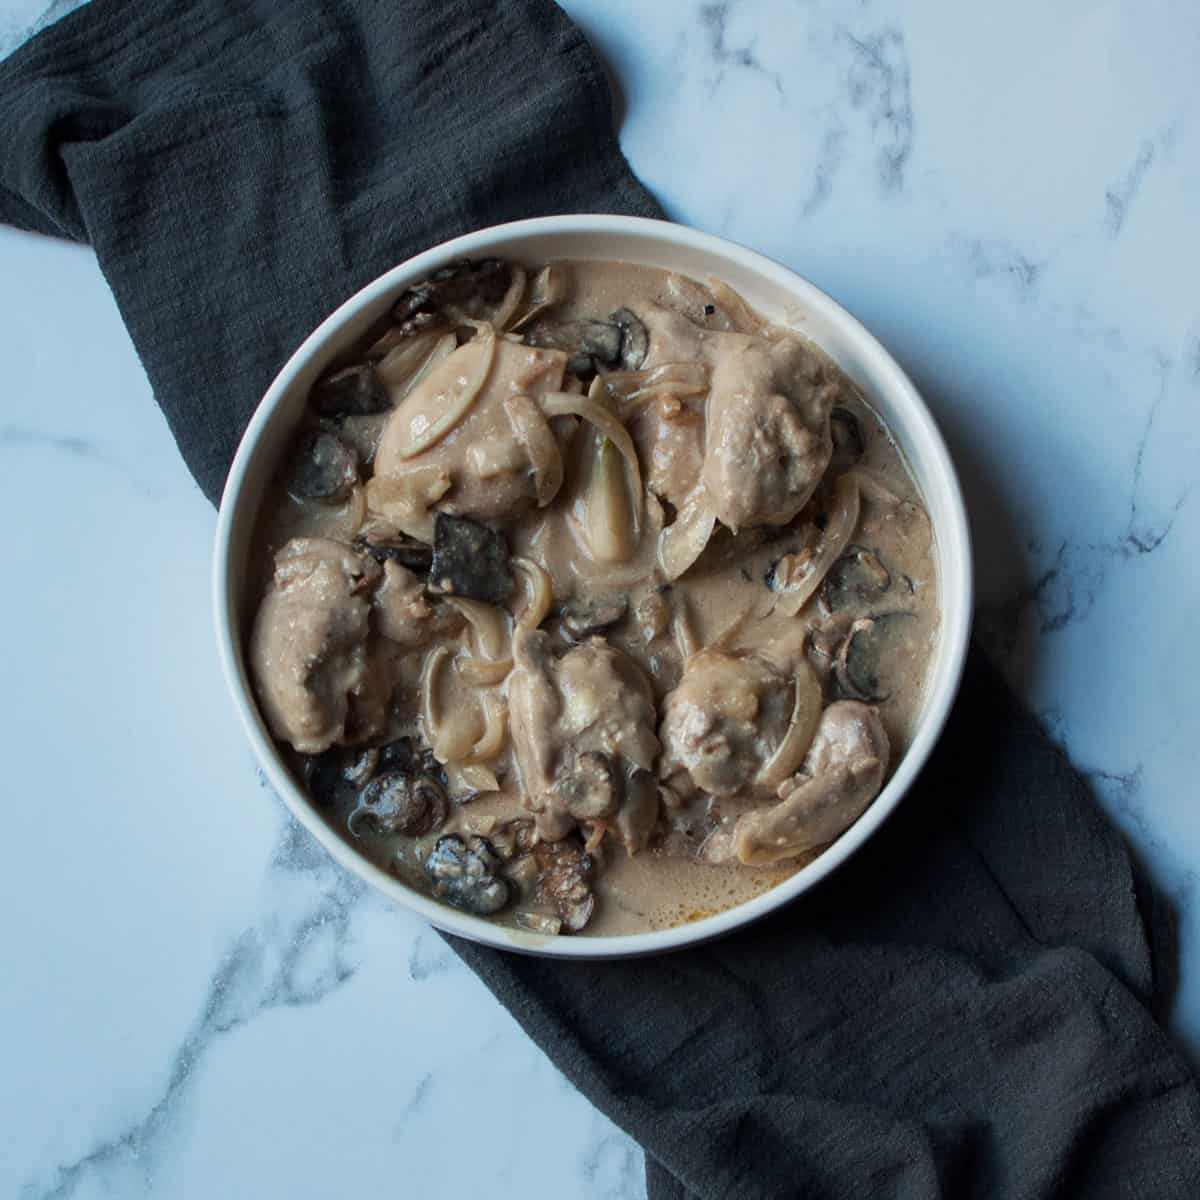 Crockpot Chicken with Onion Soup Mix in a white dish with a gray napkin